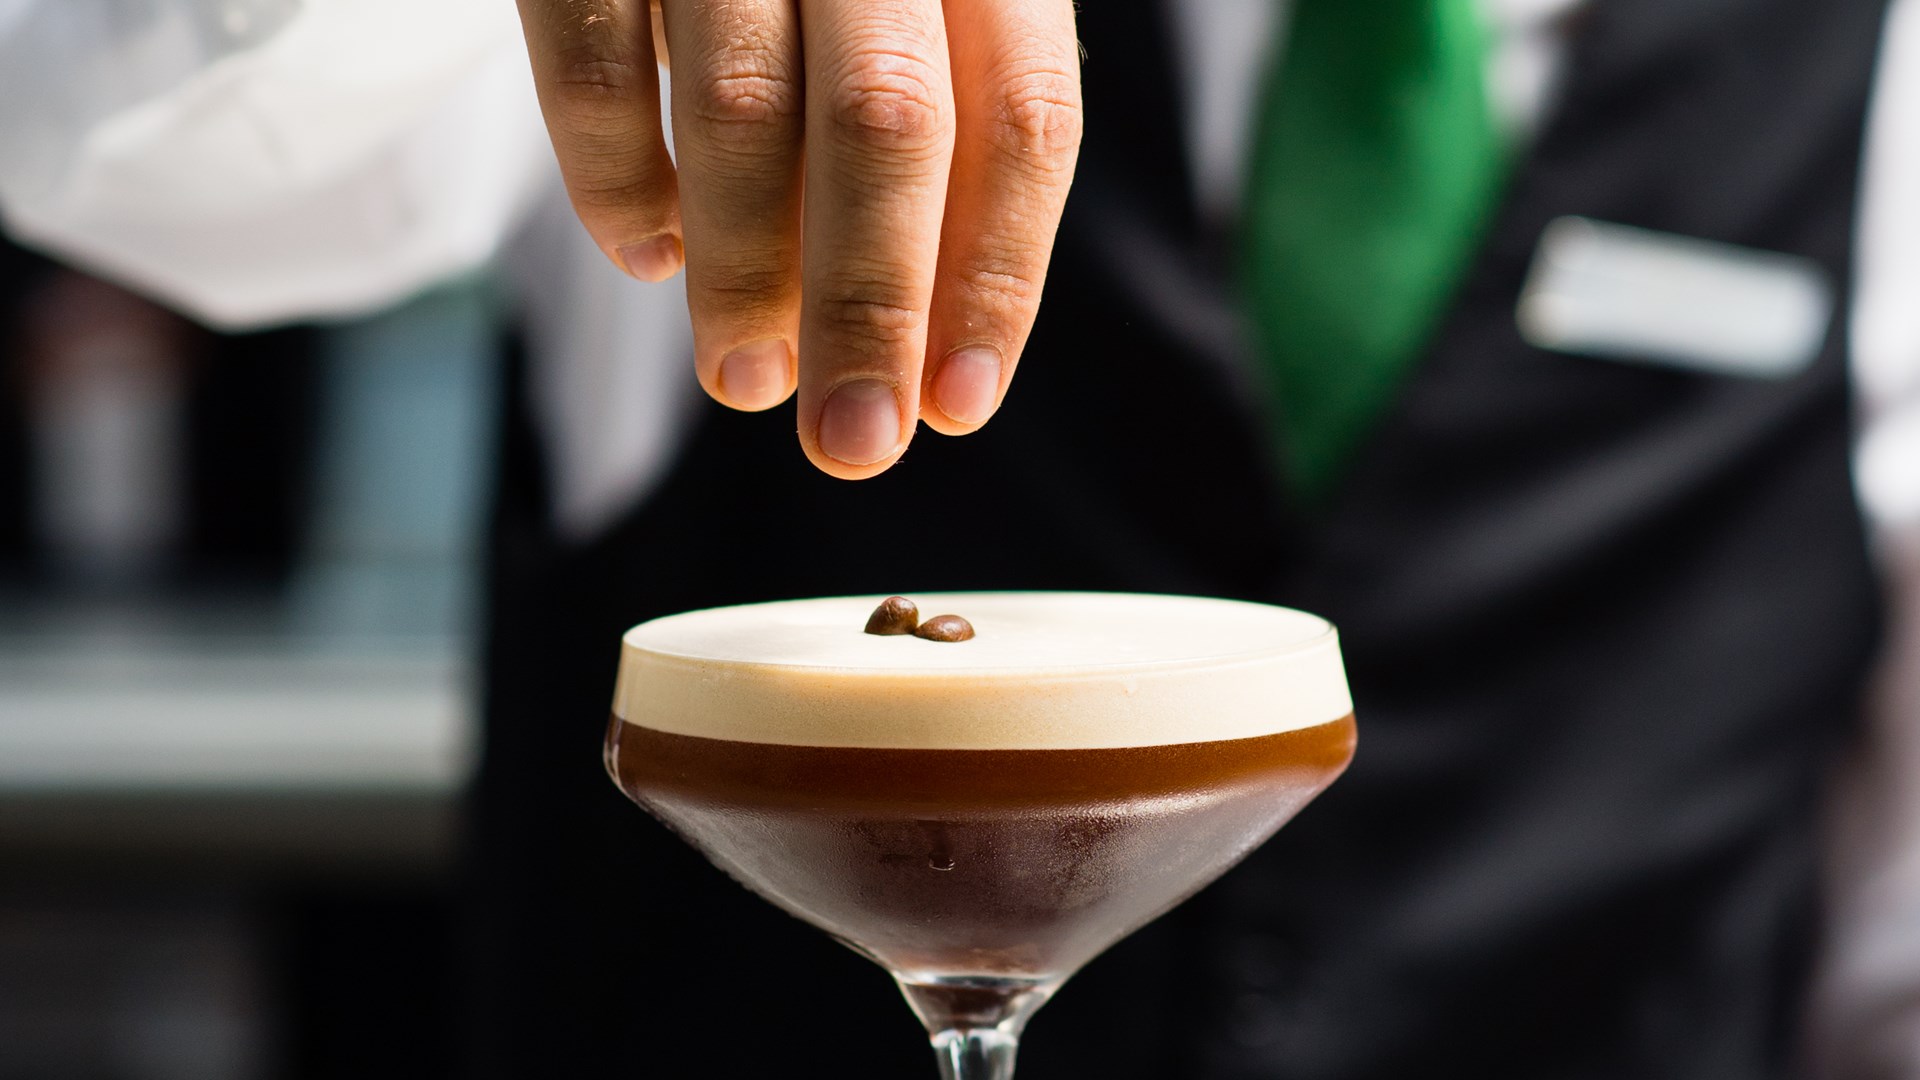 Bartender garnishing an esspresso martini cocktail with coffee beans